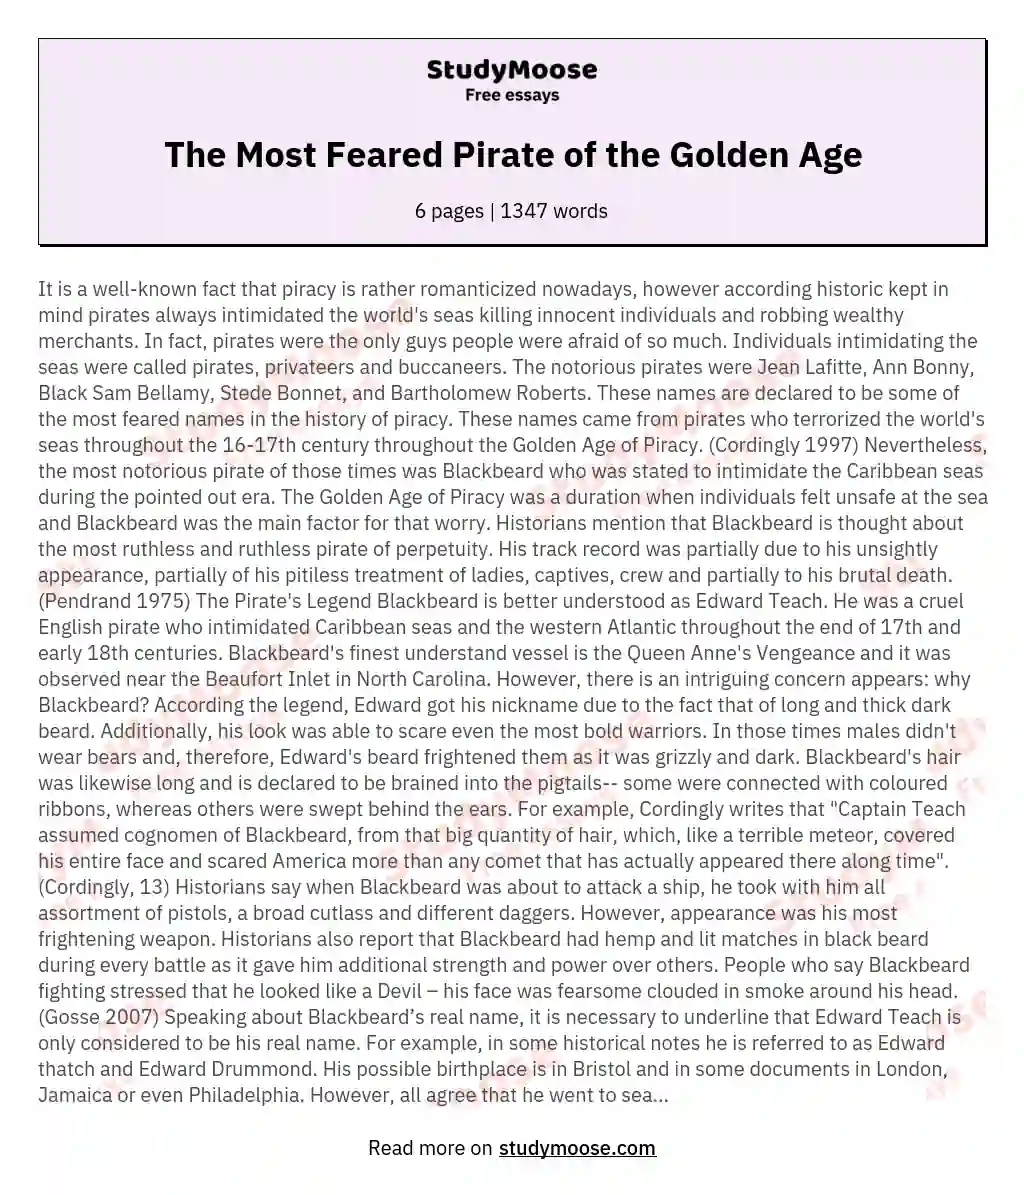 The Most Feared Pirate of the Golden Age essay